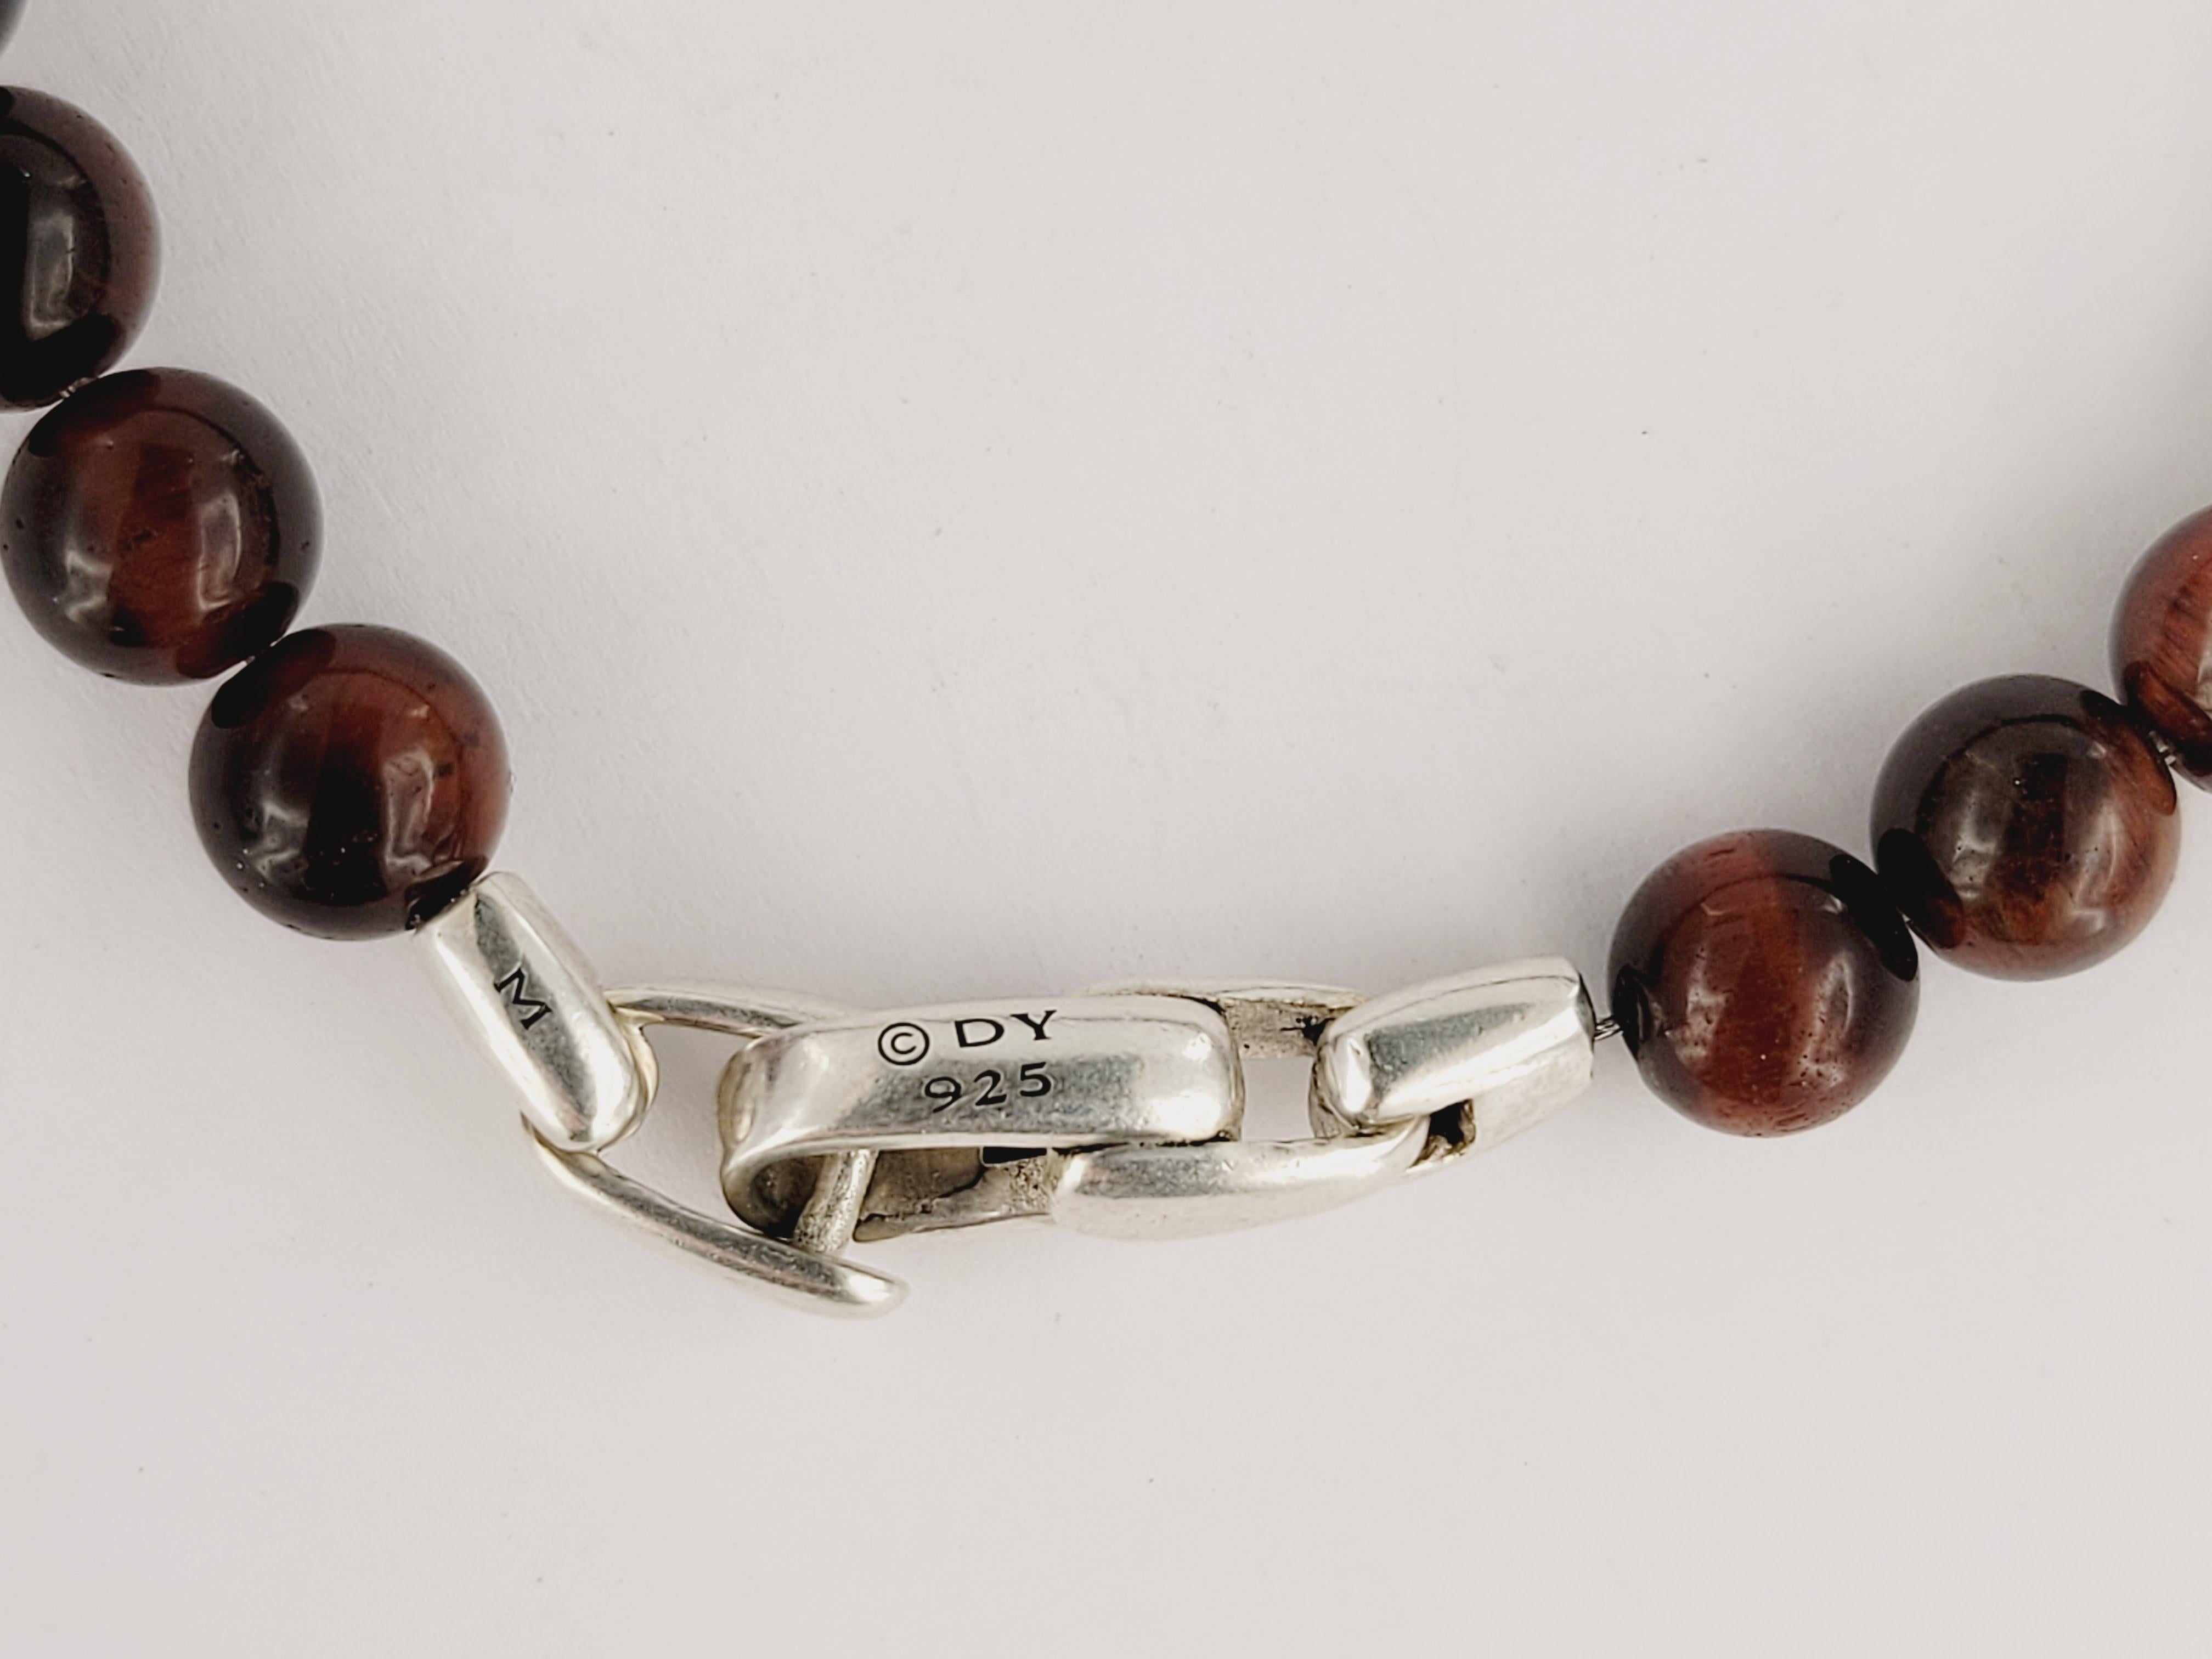 David Yurman Men's Spiritual Beads Bracelet with Tiger's Eye and Silver 6.5mm In New Condition For Sale In New York, NY